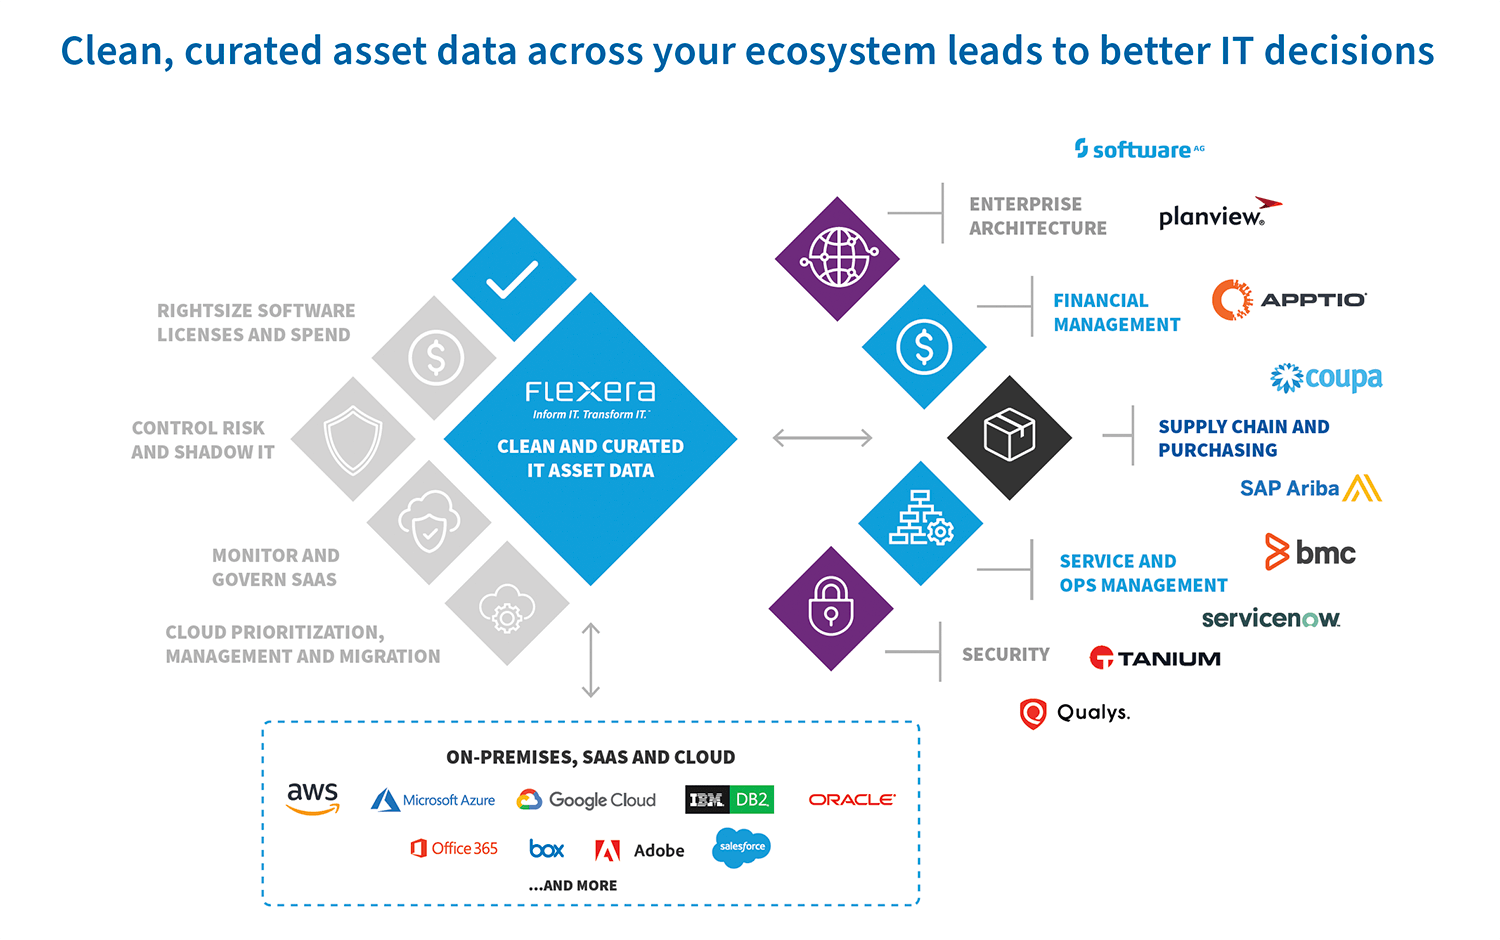 Clean, curated asset data across your ecosystem leads to better IT decisions